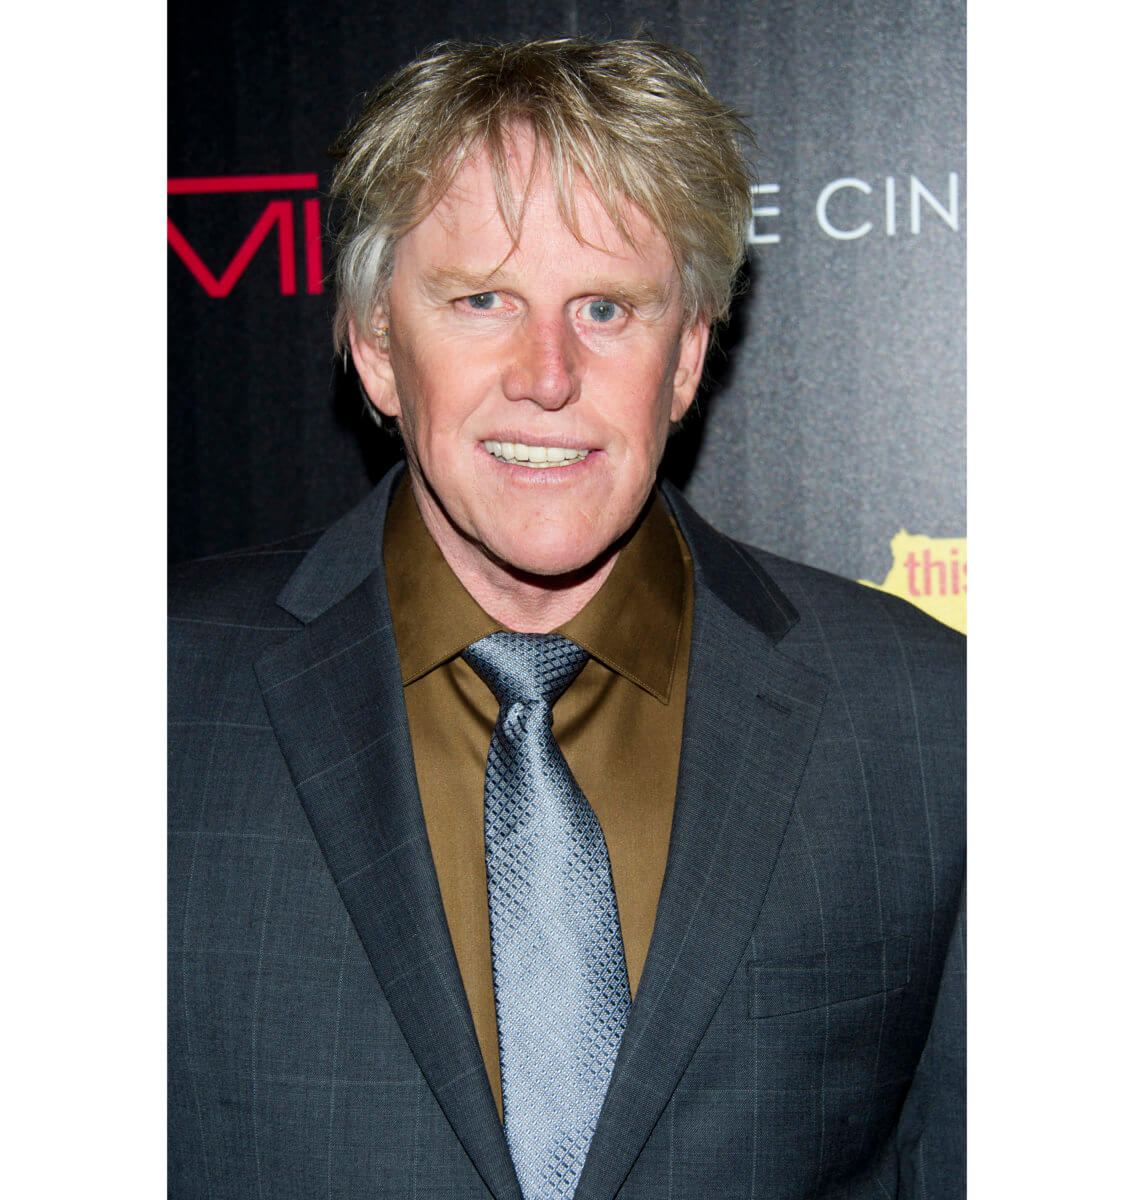 Gary Busey faces sexual assault charges